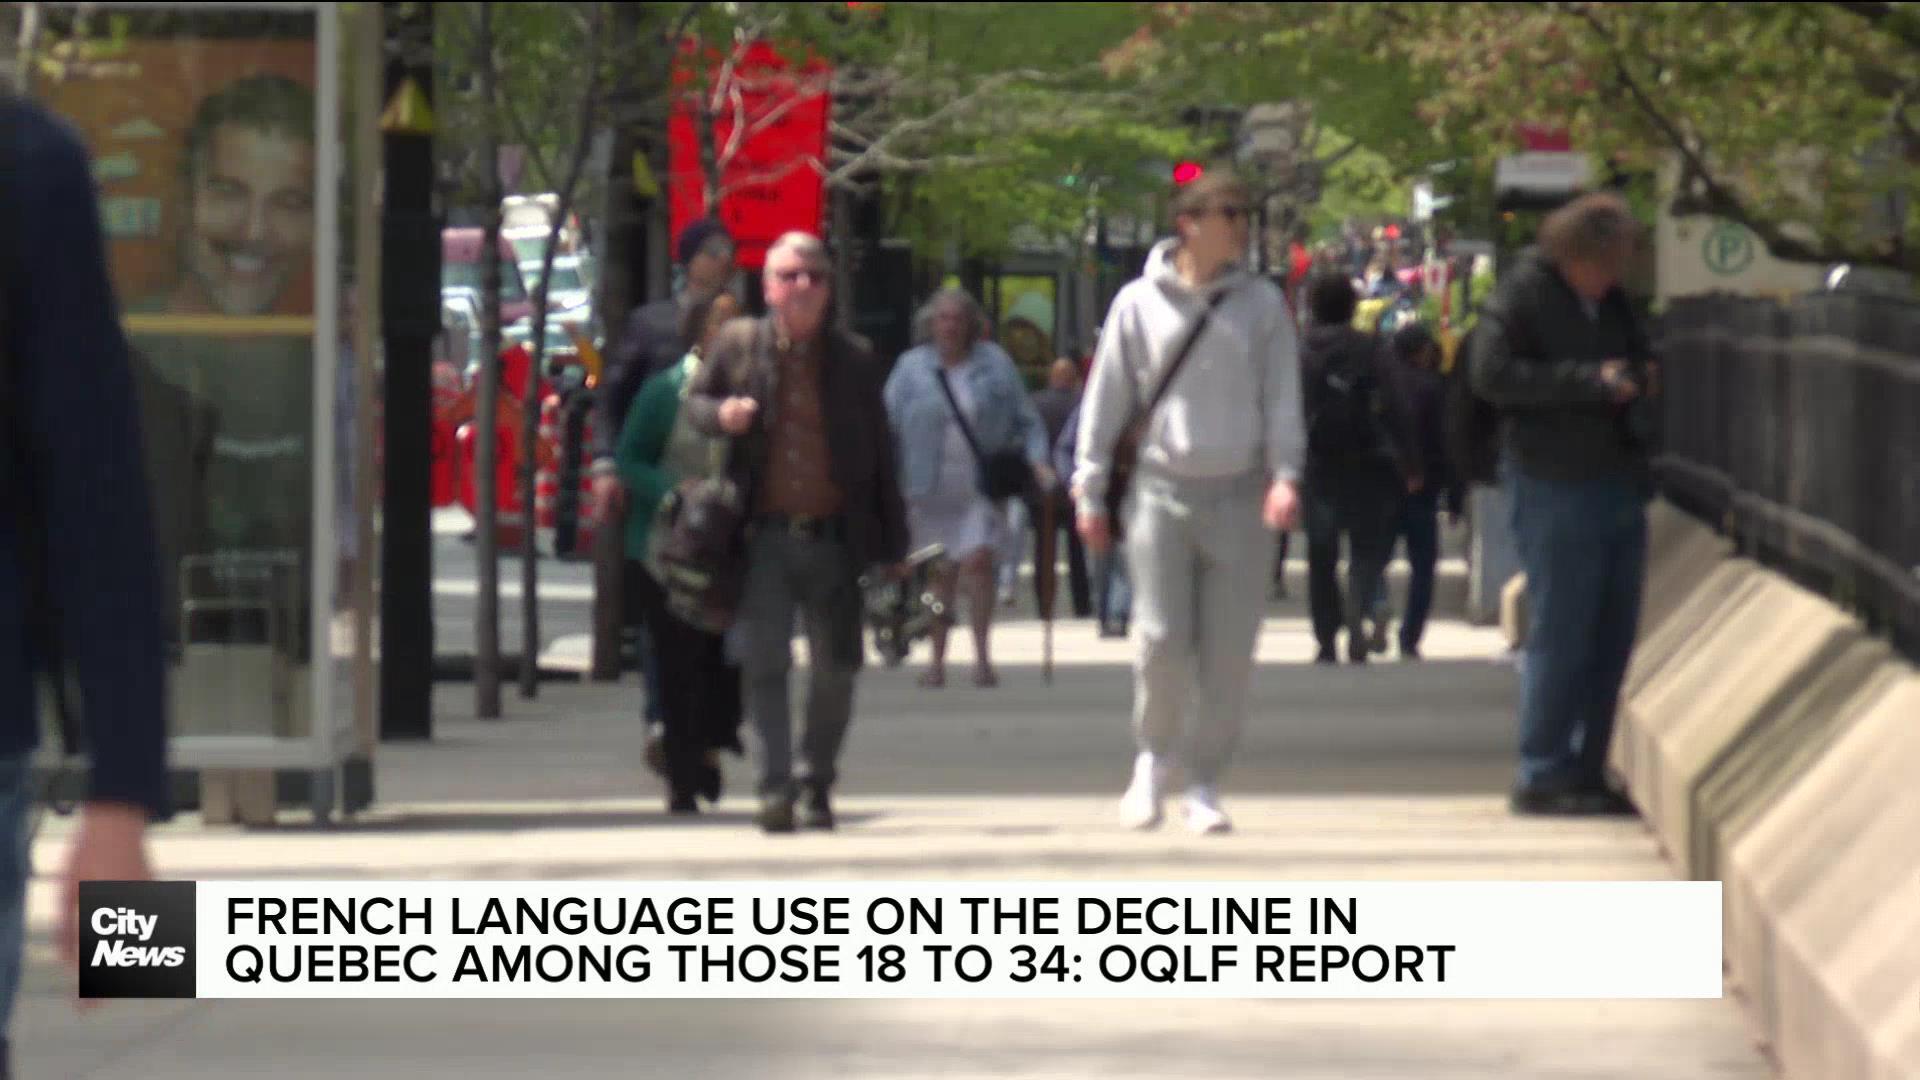 OQLF report: French language on the decline in Quebec